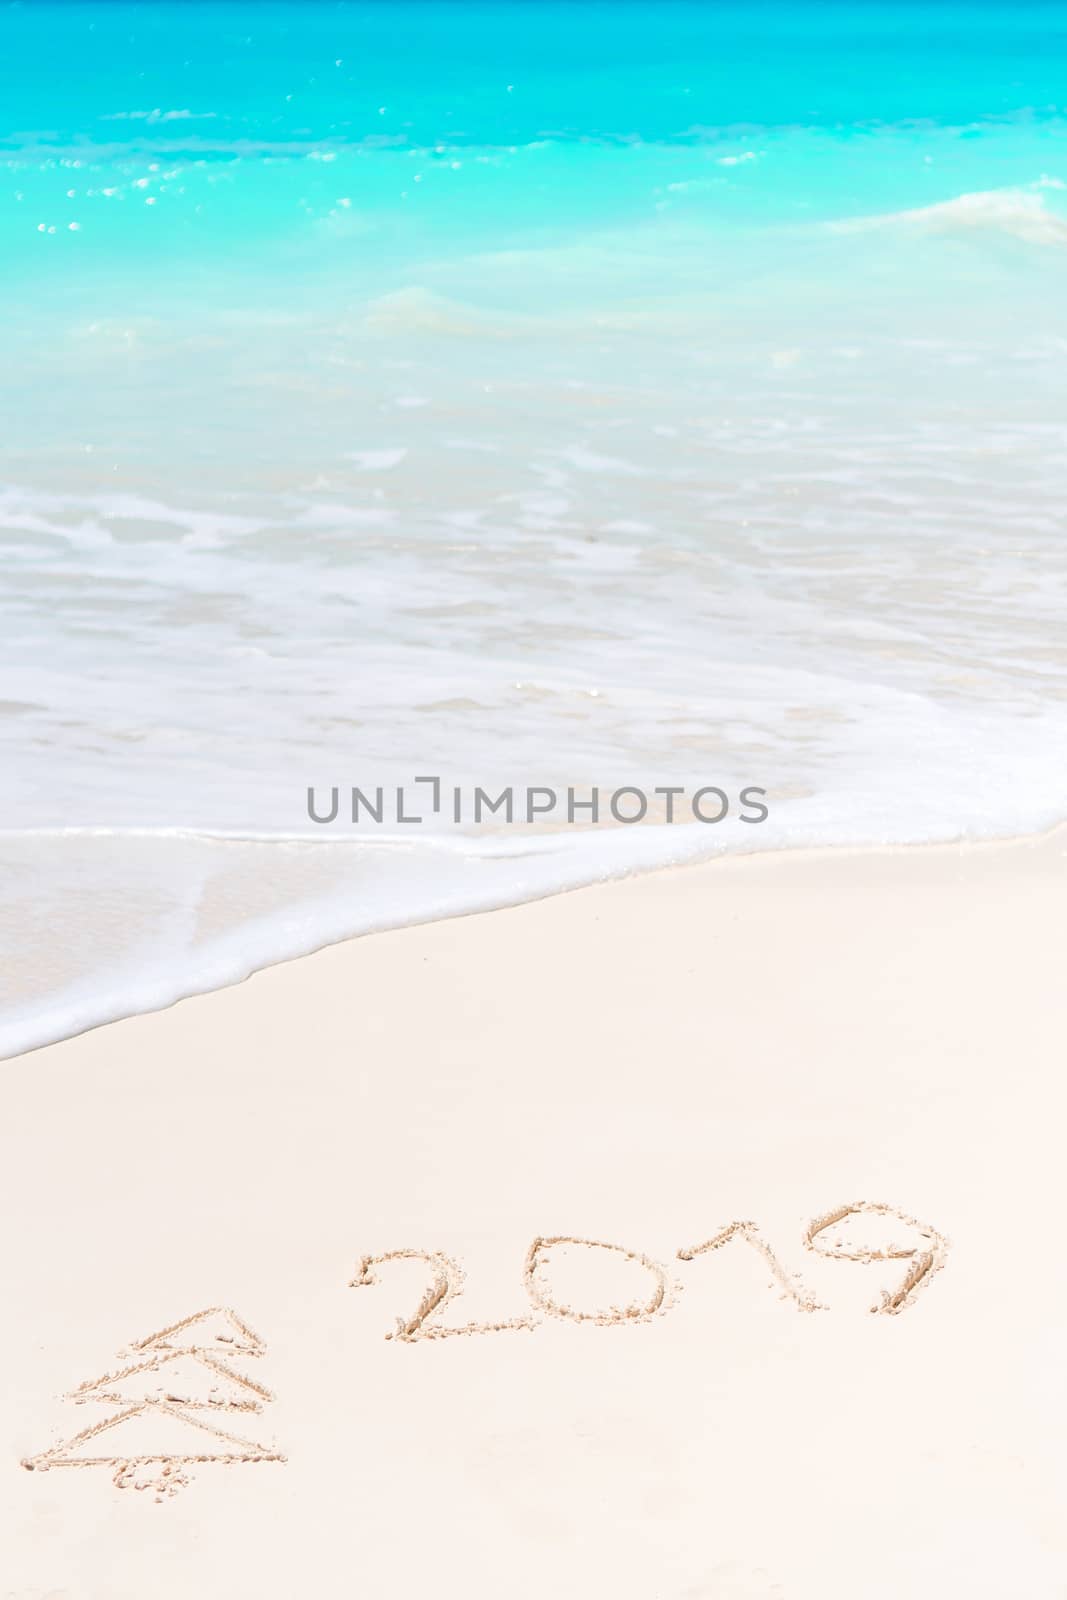 2019 and firtree painting on sandy white beach by travnikovstudio